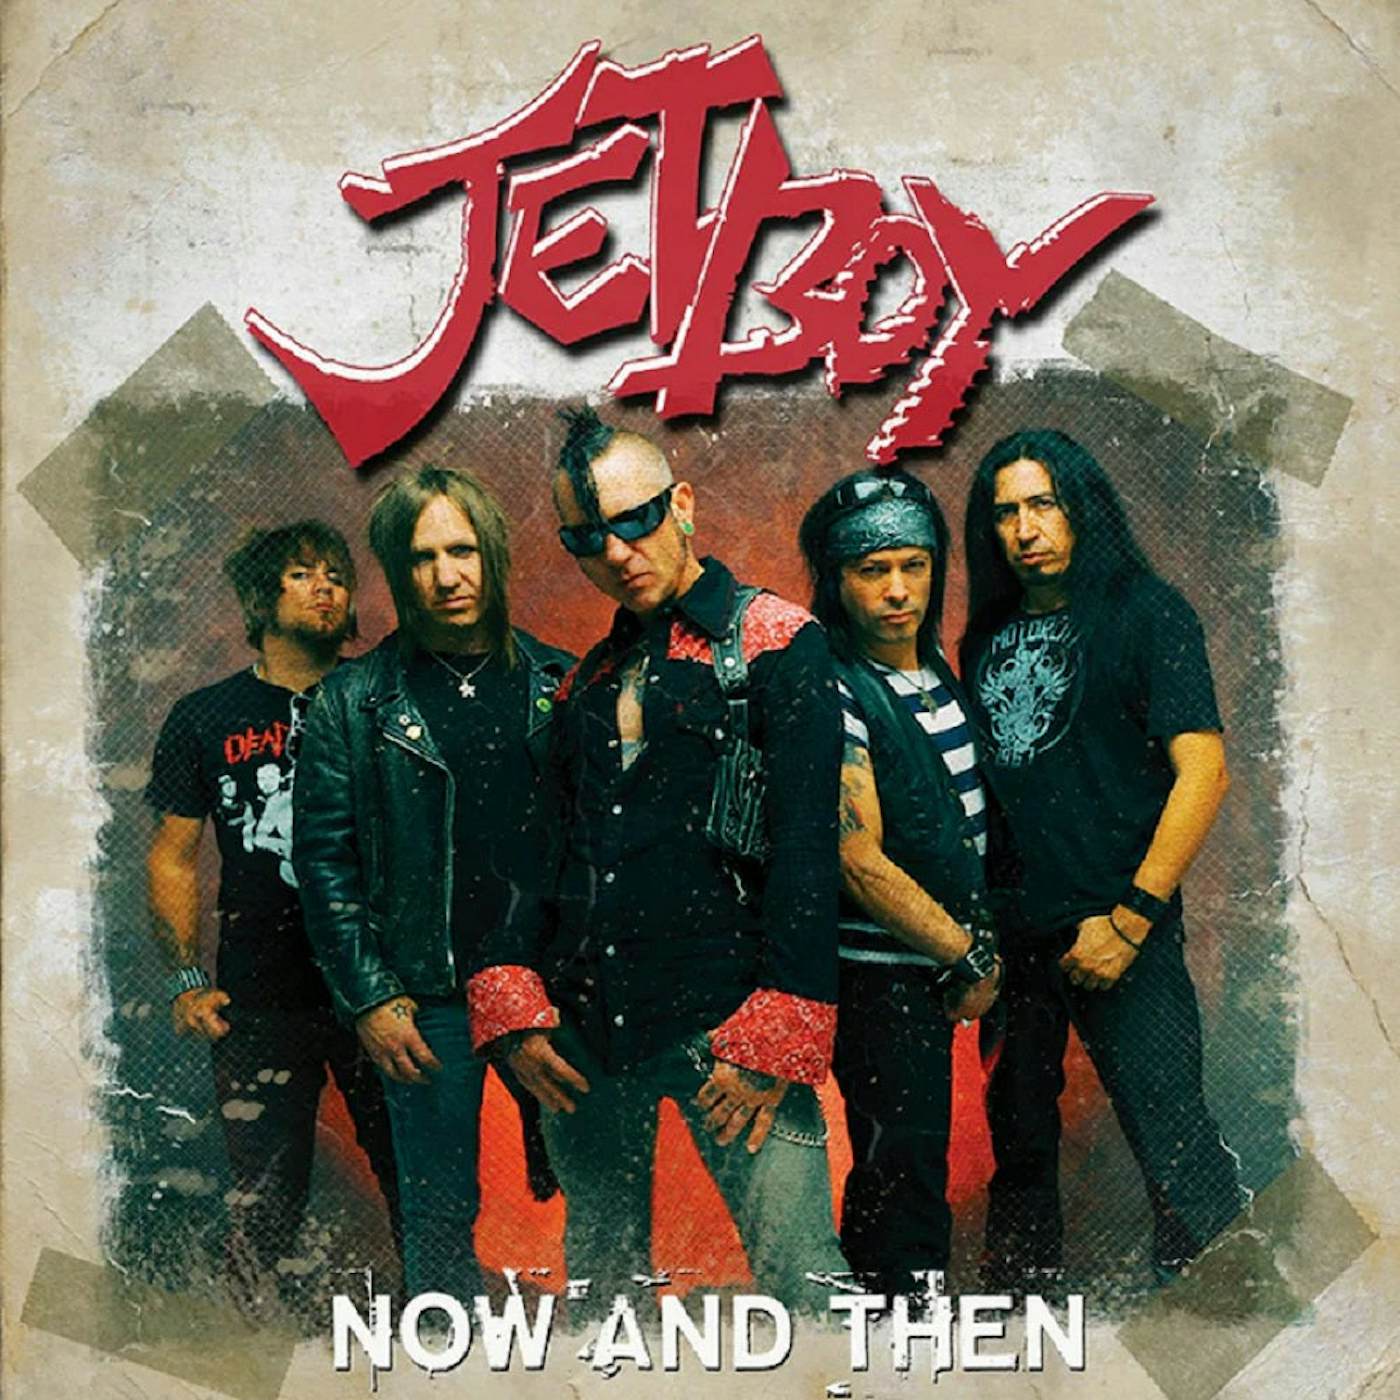 Jetboy "Now And Then" CD